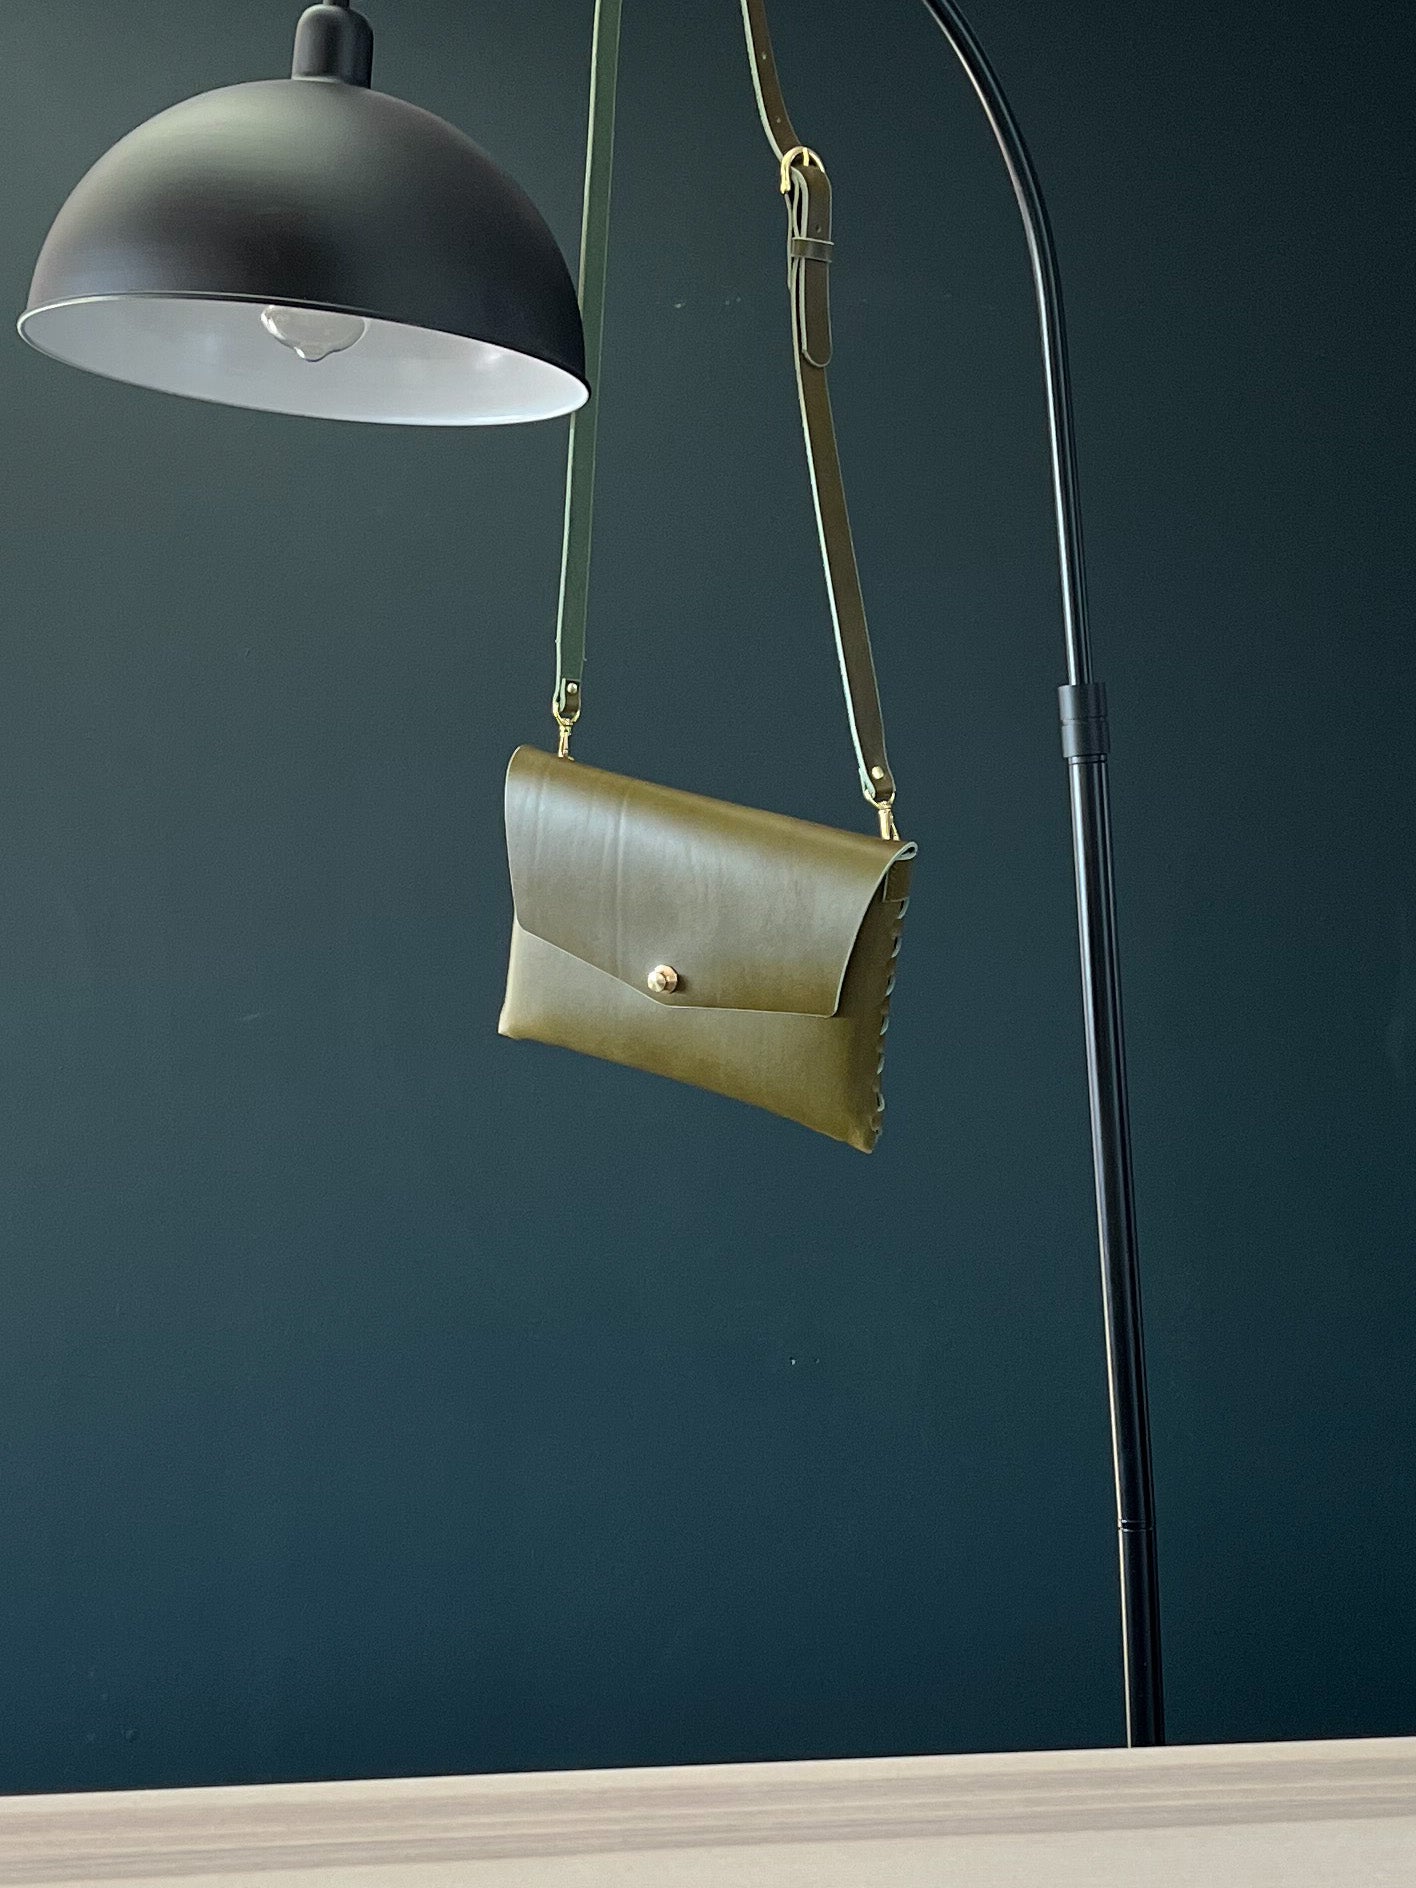 modjūl’s leather mini bag deluxe bag in olive hanging on a lamp. A larger take on the classic mini bag, a rectangular-shaped bag with long detachable straps, handcrafted in Canada using quality Italian leather and brass hardware.